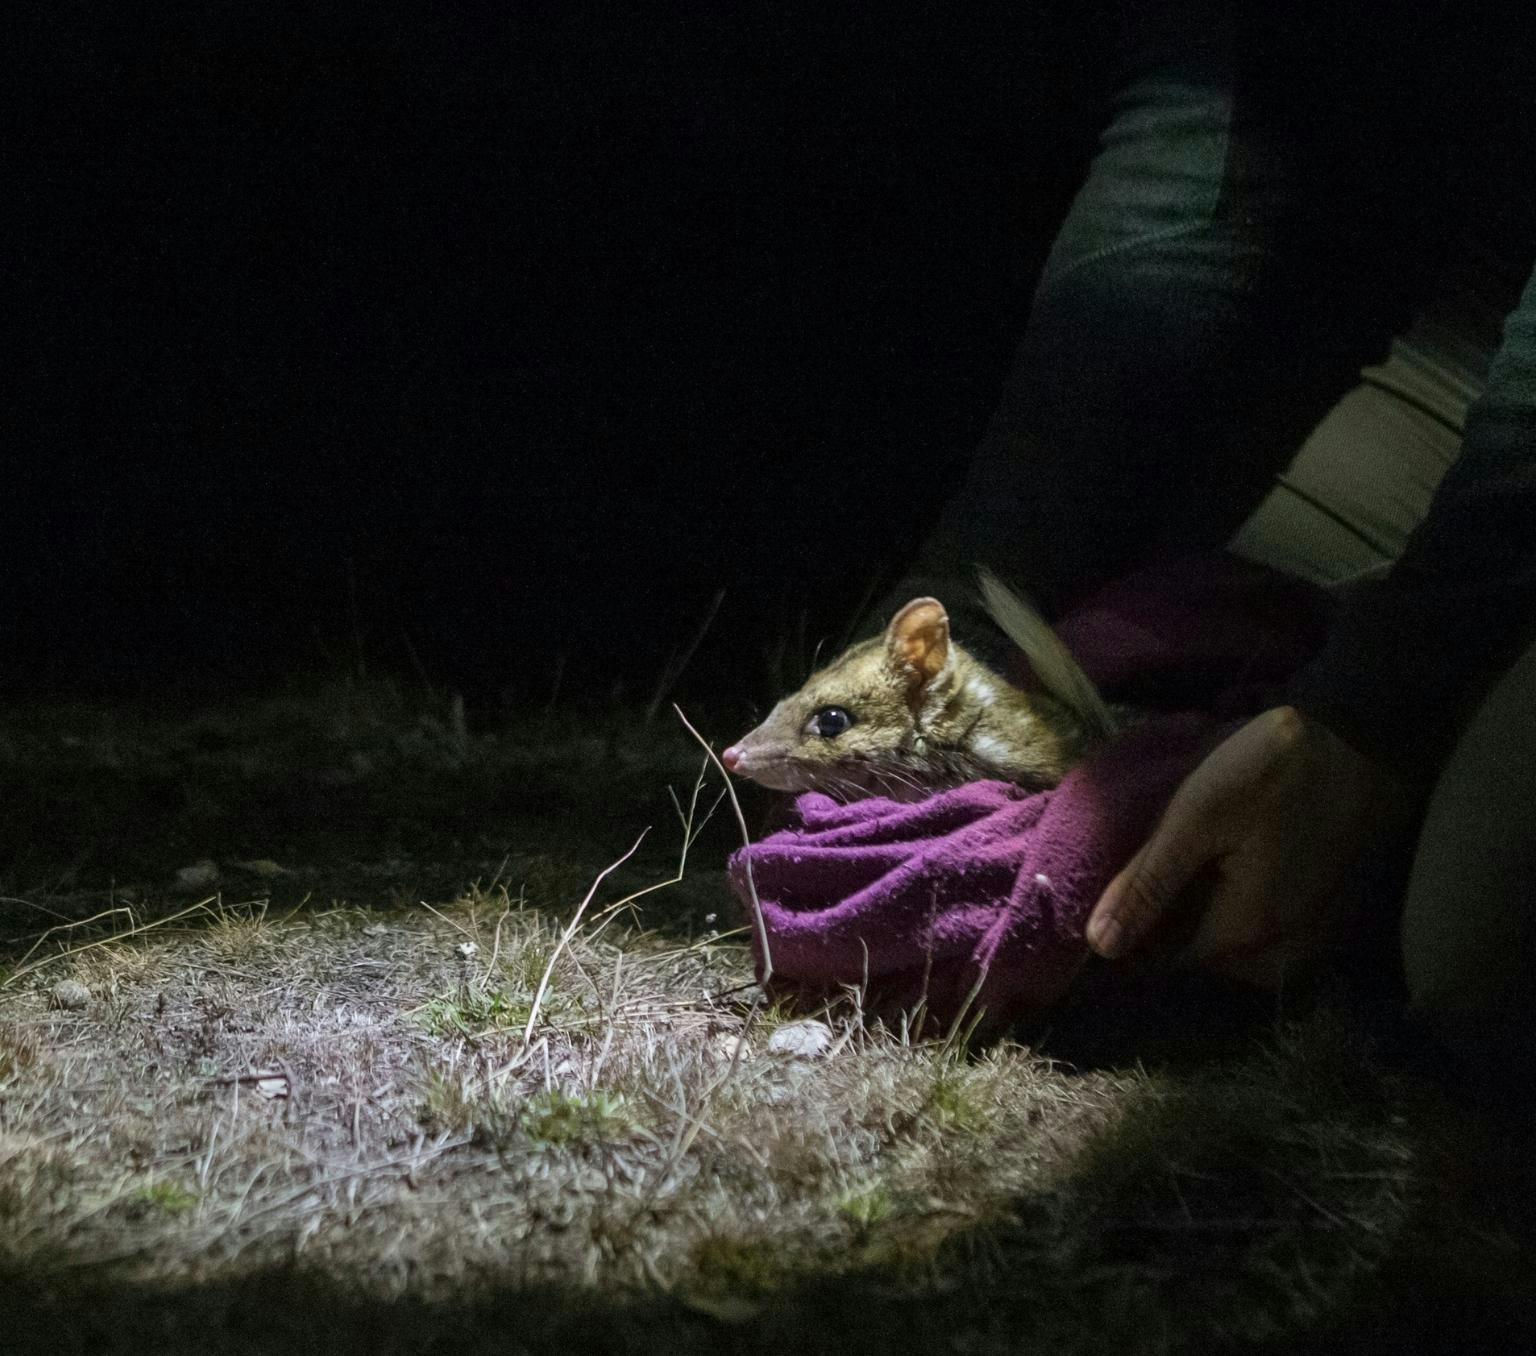 A quoll wrapped in a purple blanket is placed on the ground at night. A spotlight lights up the ground in front of it.